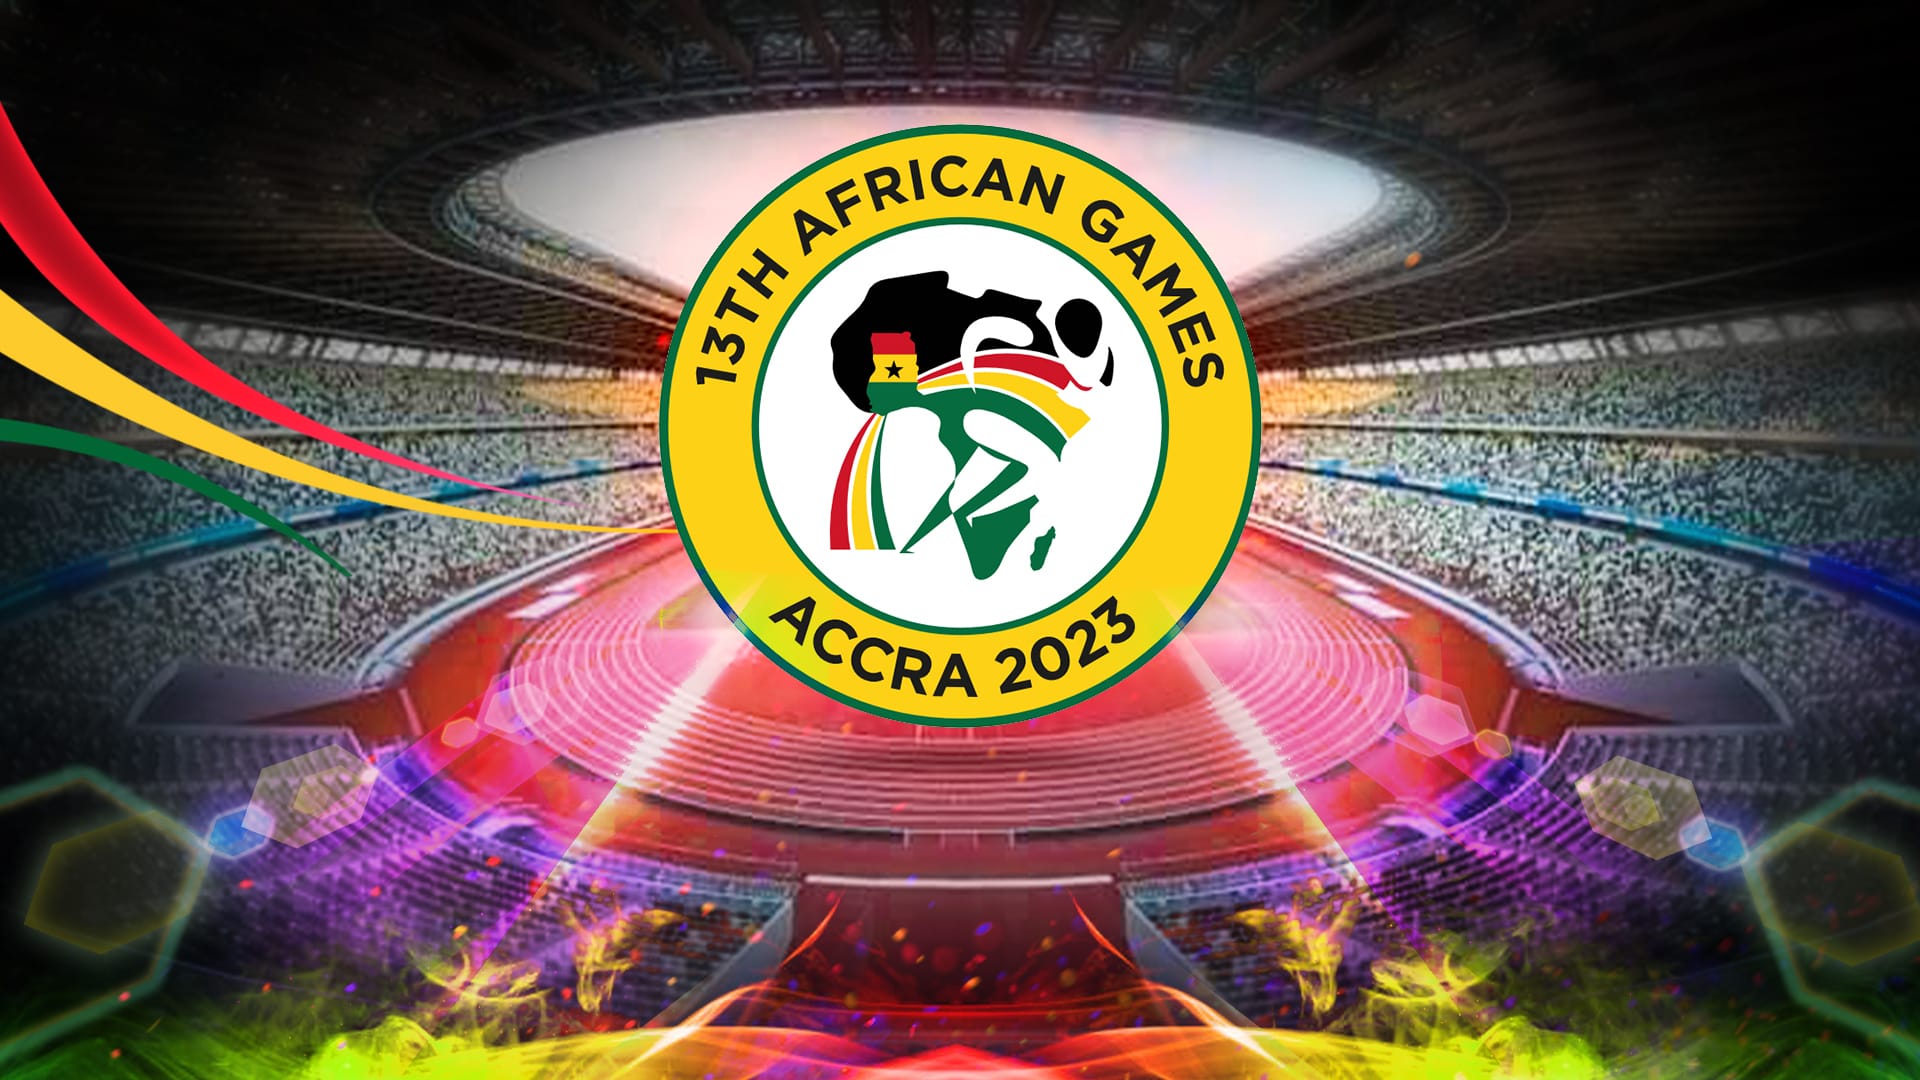 CEEK Accra 2023 African Games MORNING